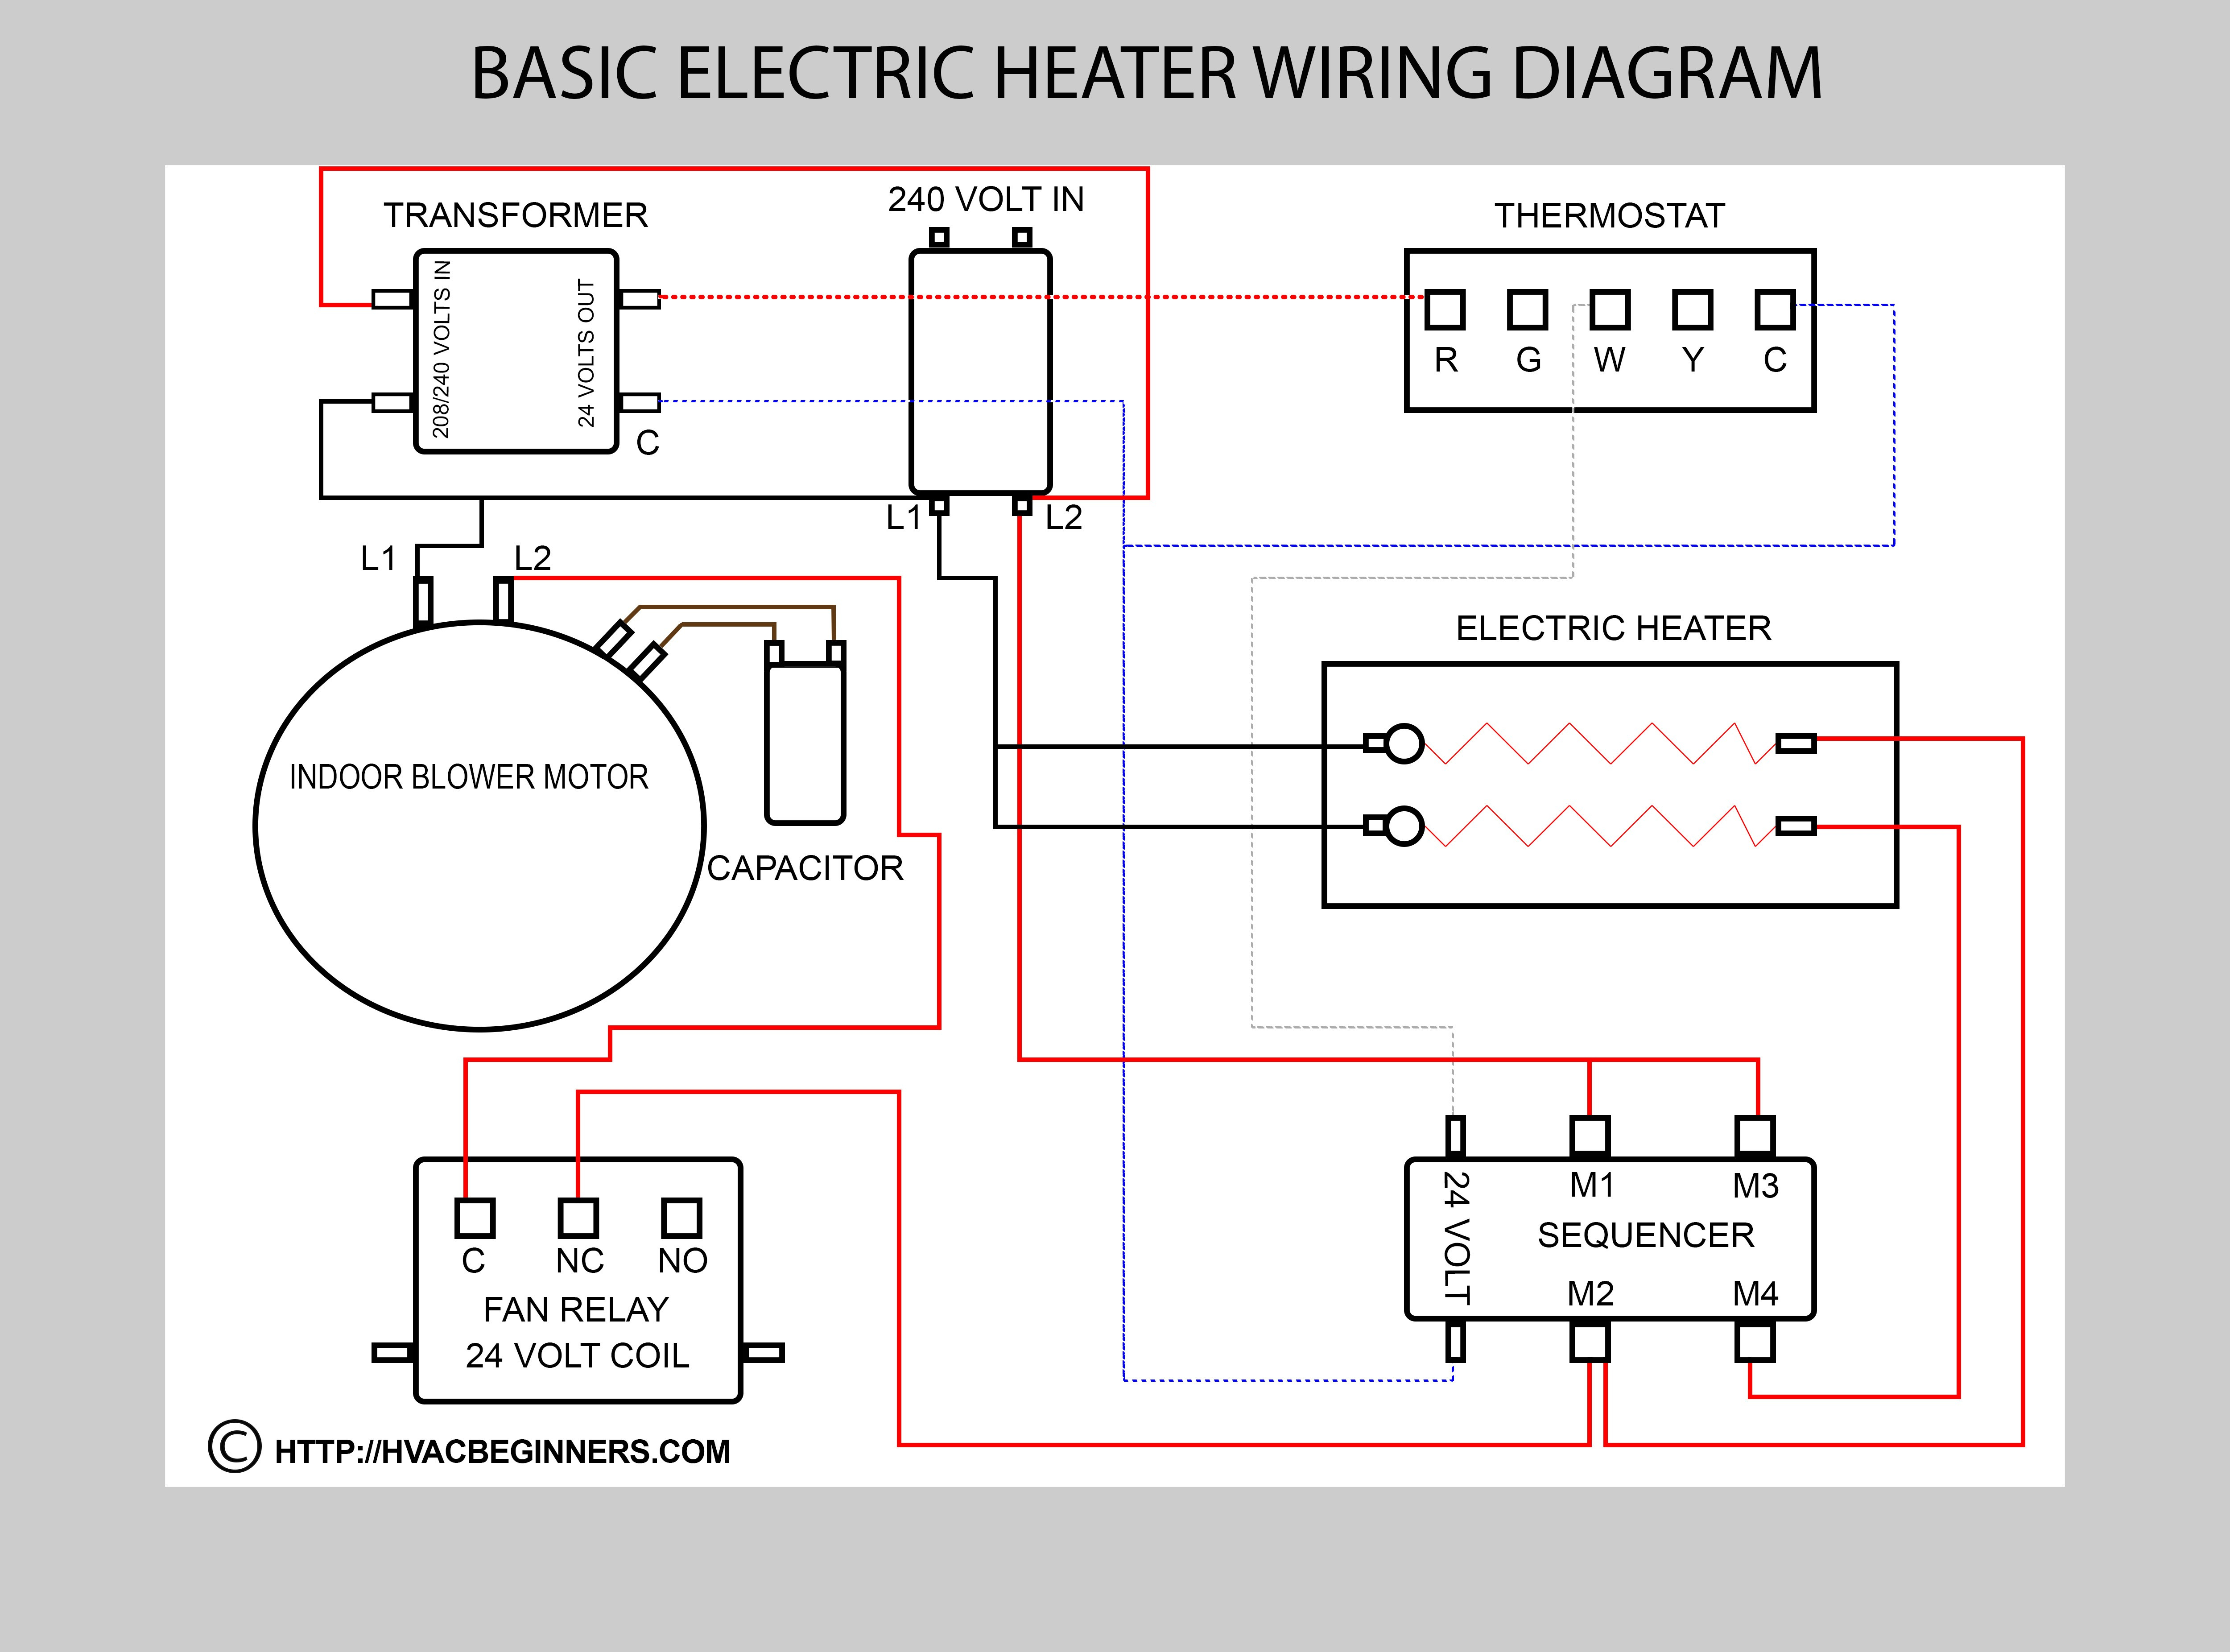 Wire Diagram Symbols Tank Installation Diagram Further Electrical House Wiring Circuit